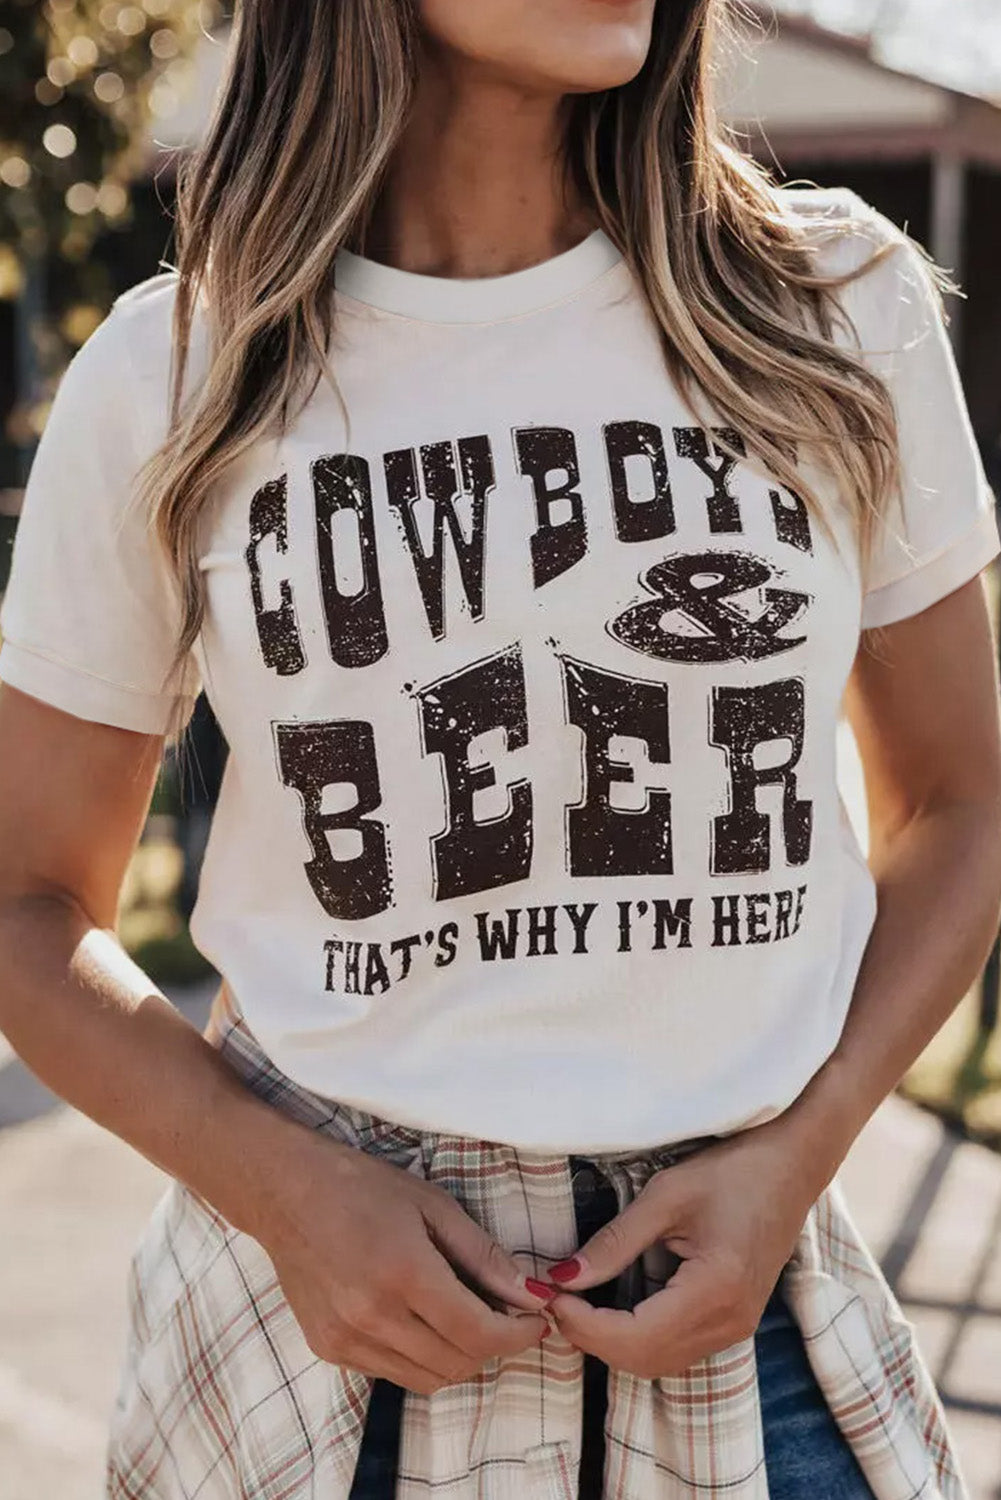 White Cow Boys & Beers Letters Graphic T-Shirt